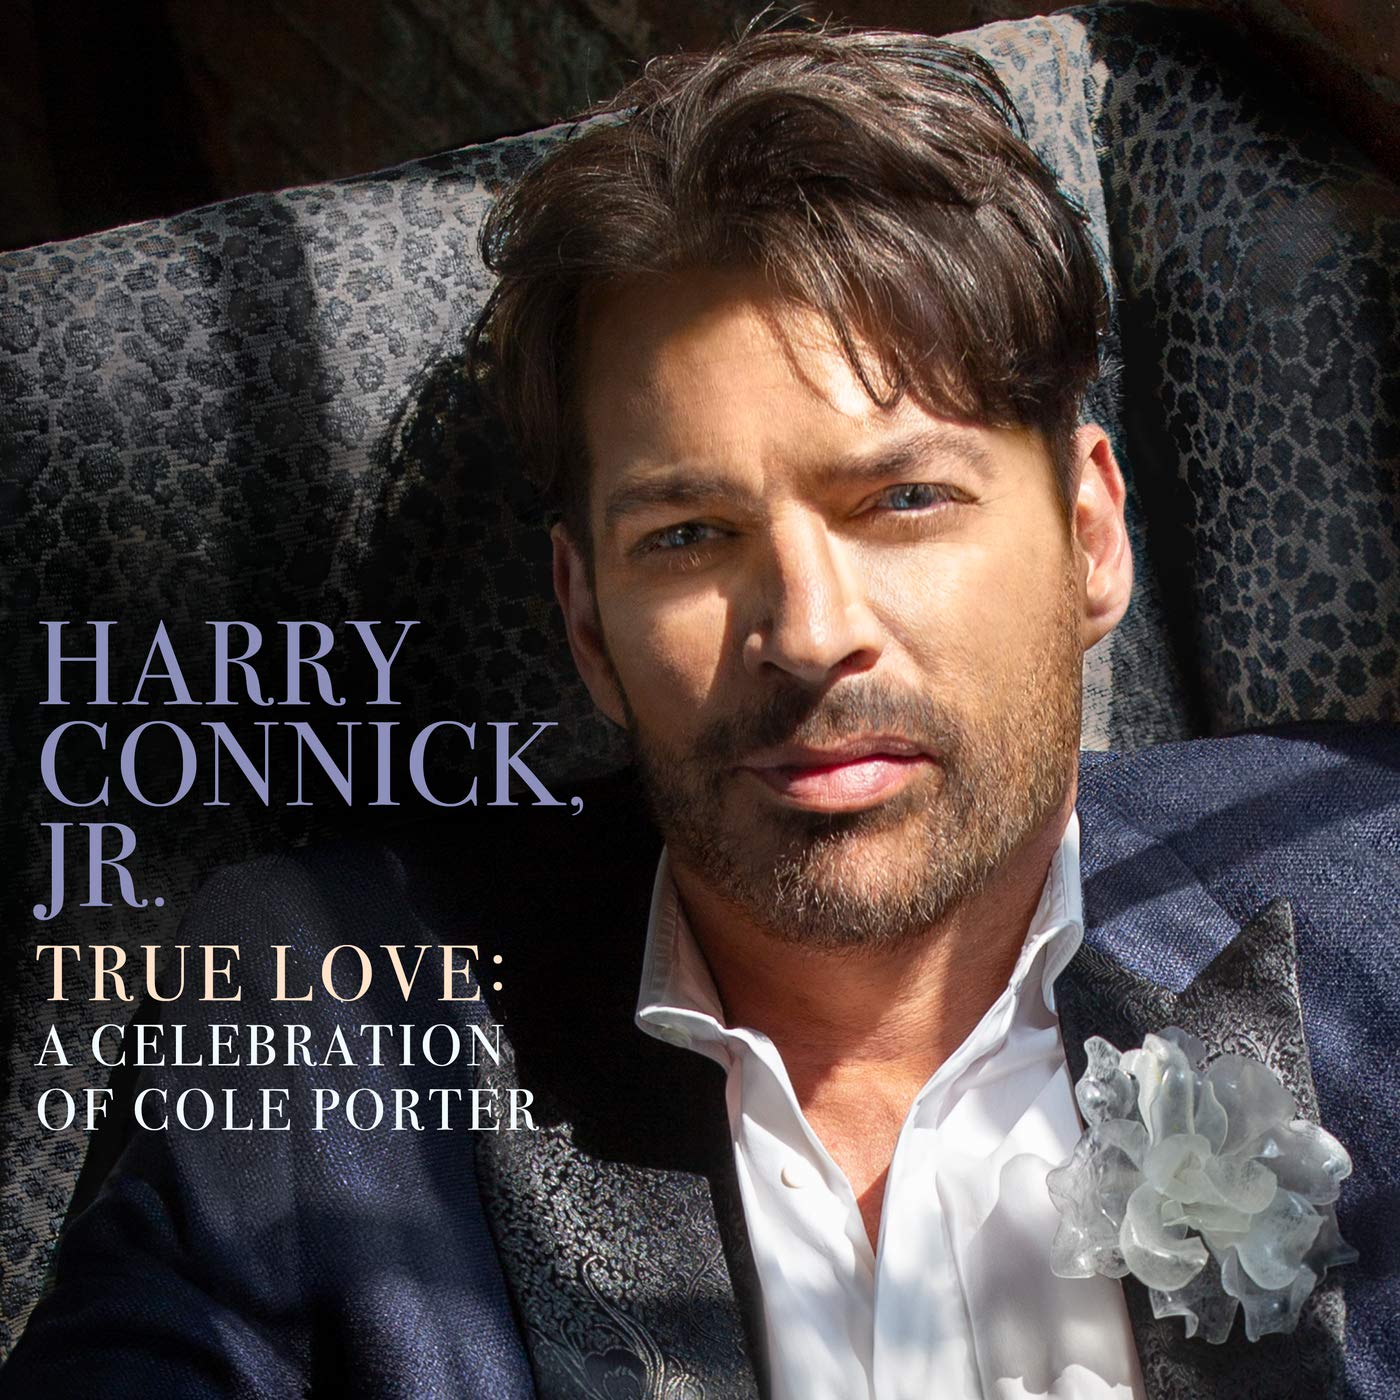 True Love: A Celebration of Cole Porter by Harry Connick Jr. 2LP Vinyl $20 + F/S w/ Prime or on $25+